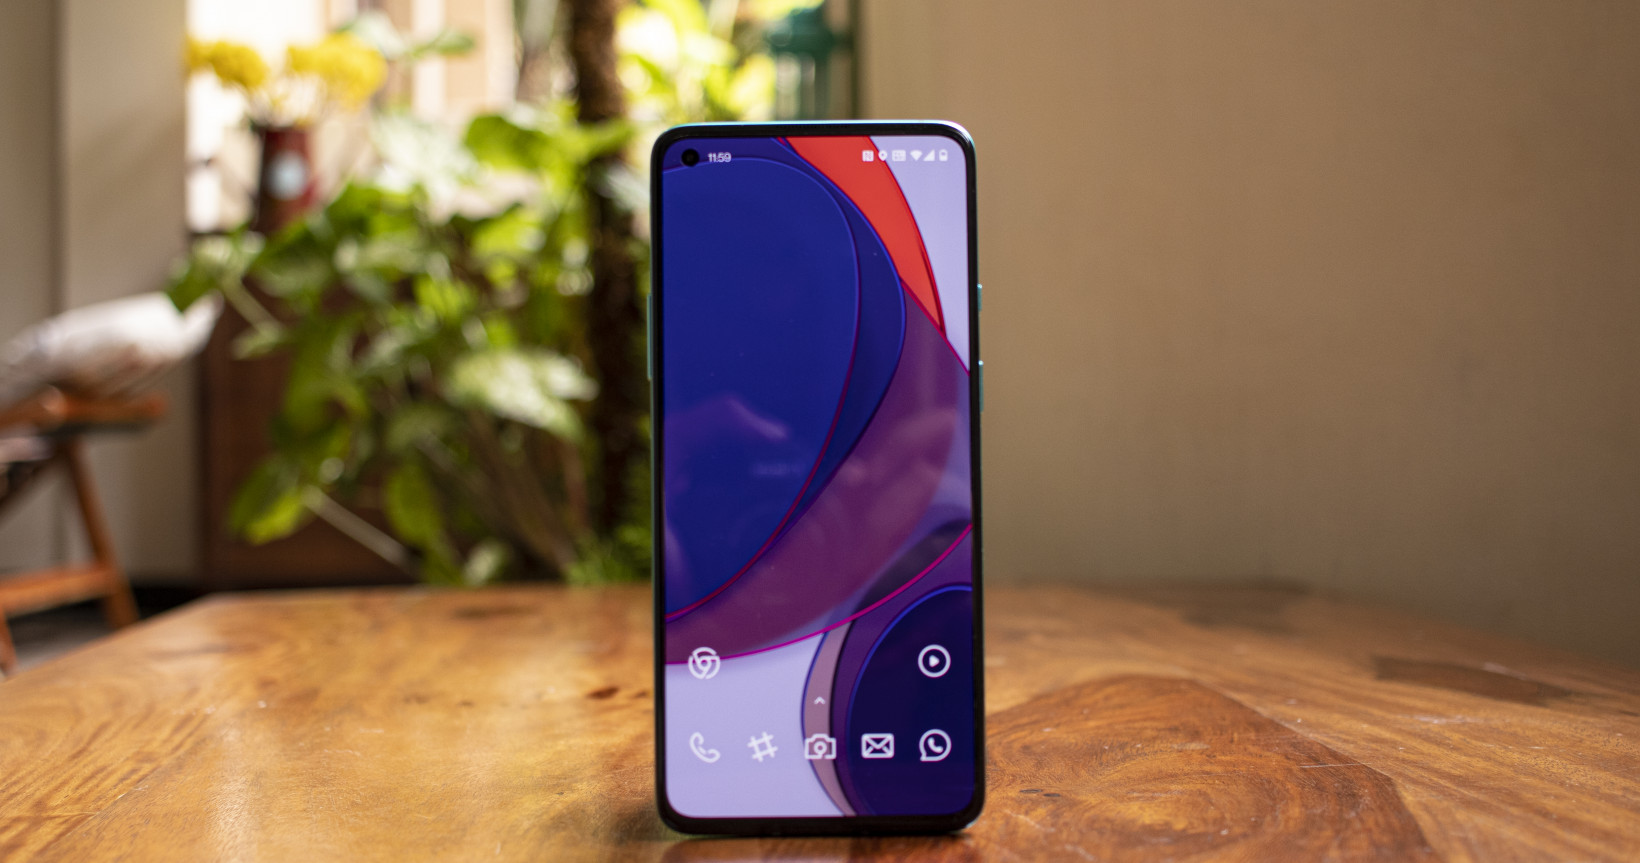 The OnePlus 8T features a glorious 120Hz display that supports HDR10+